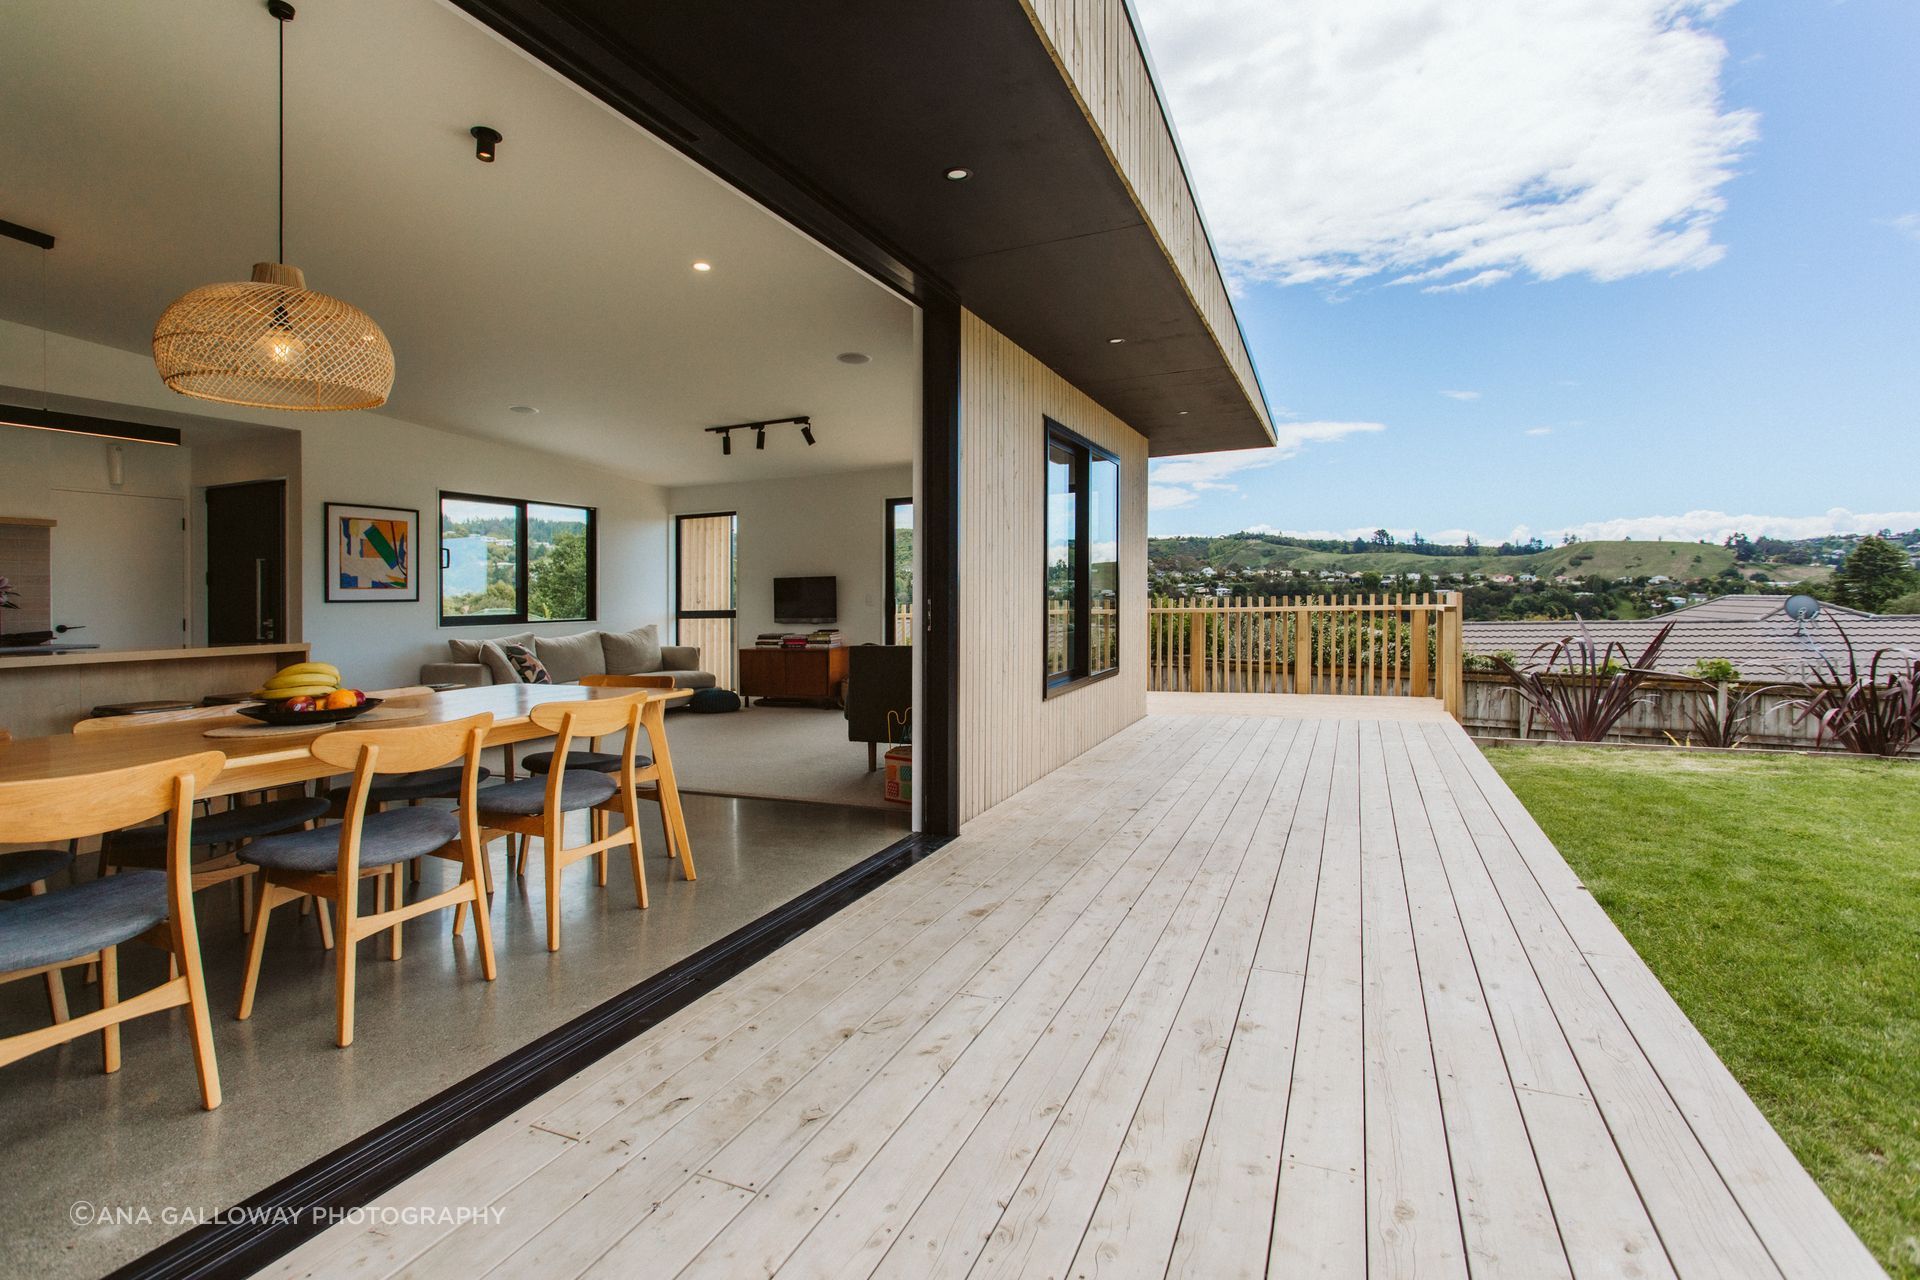 Generous sliding doors connect the living area to the deck.